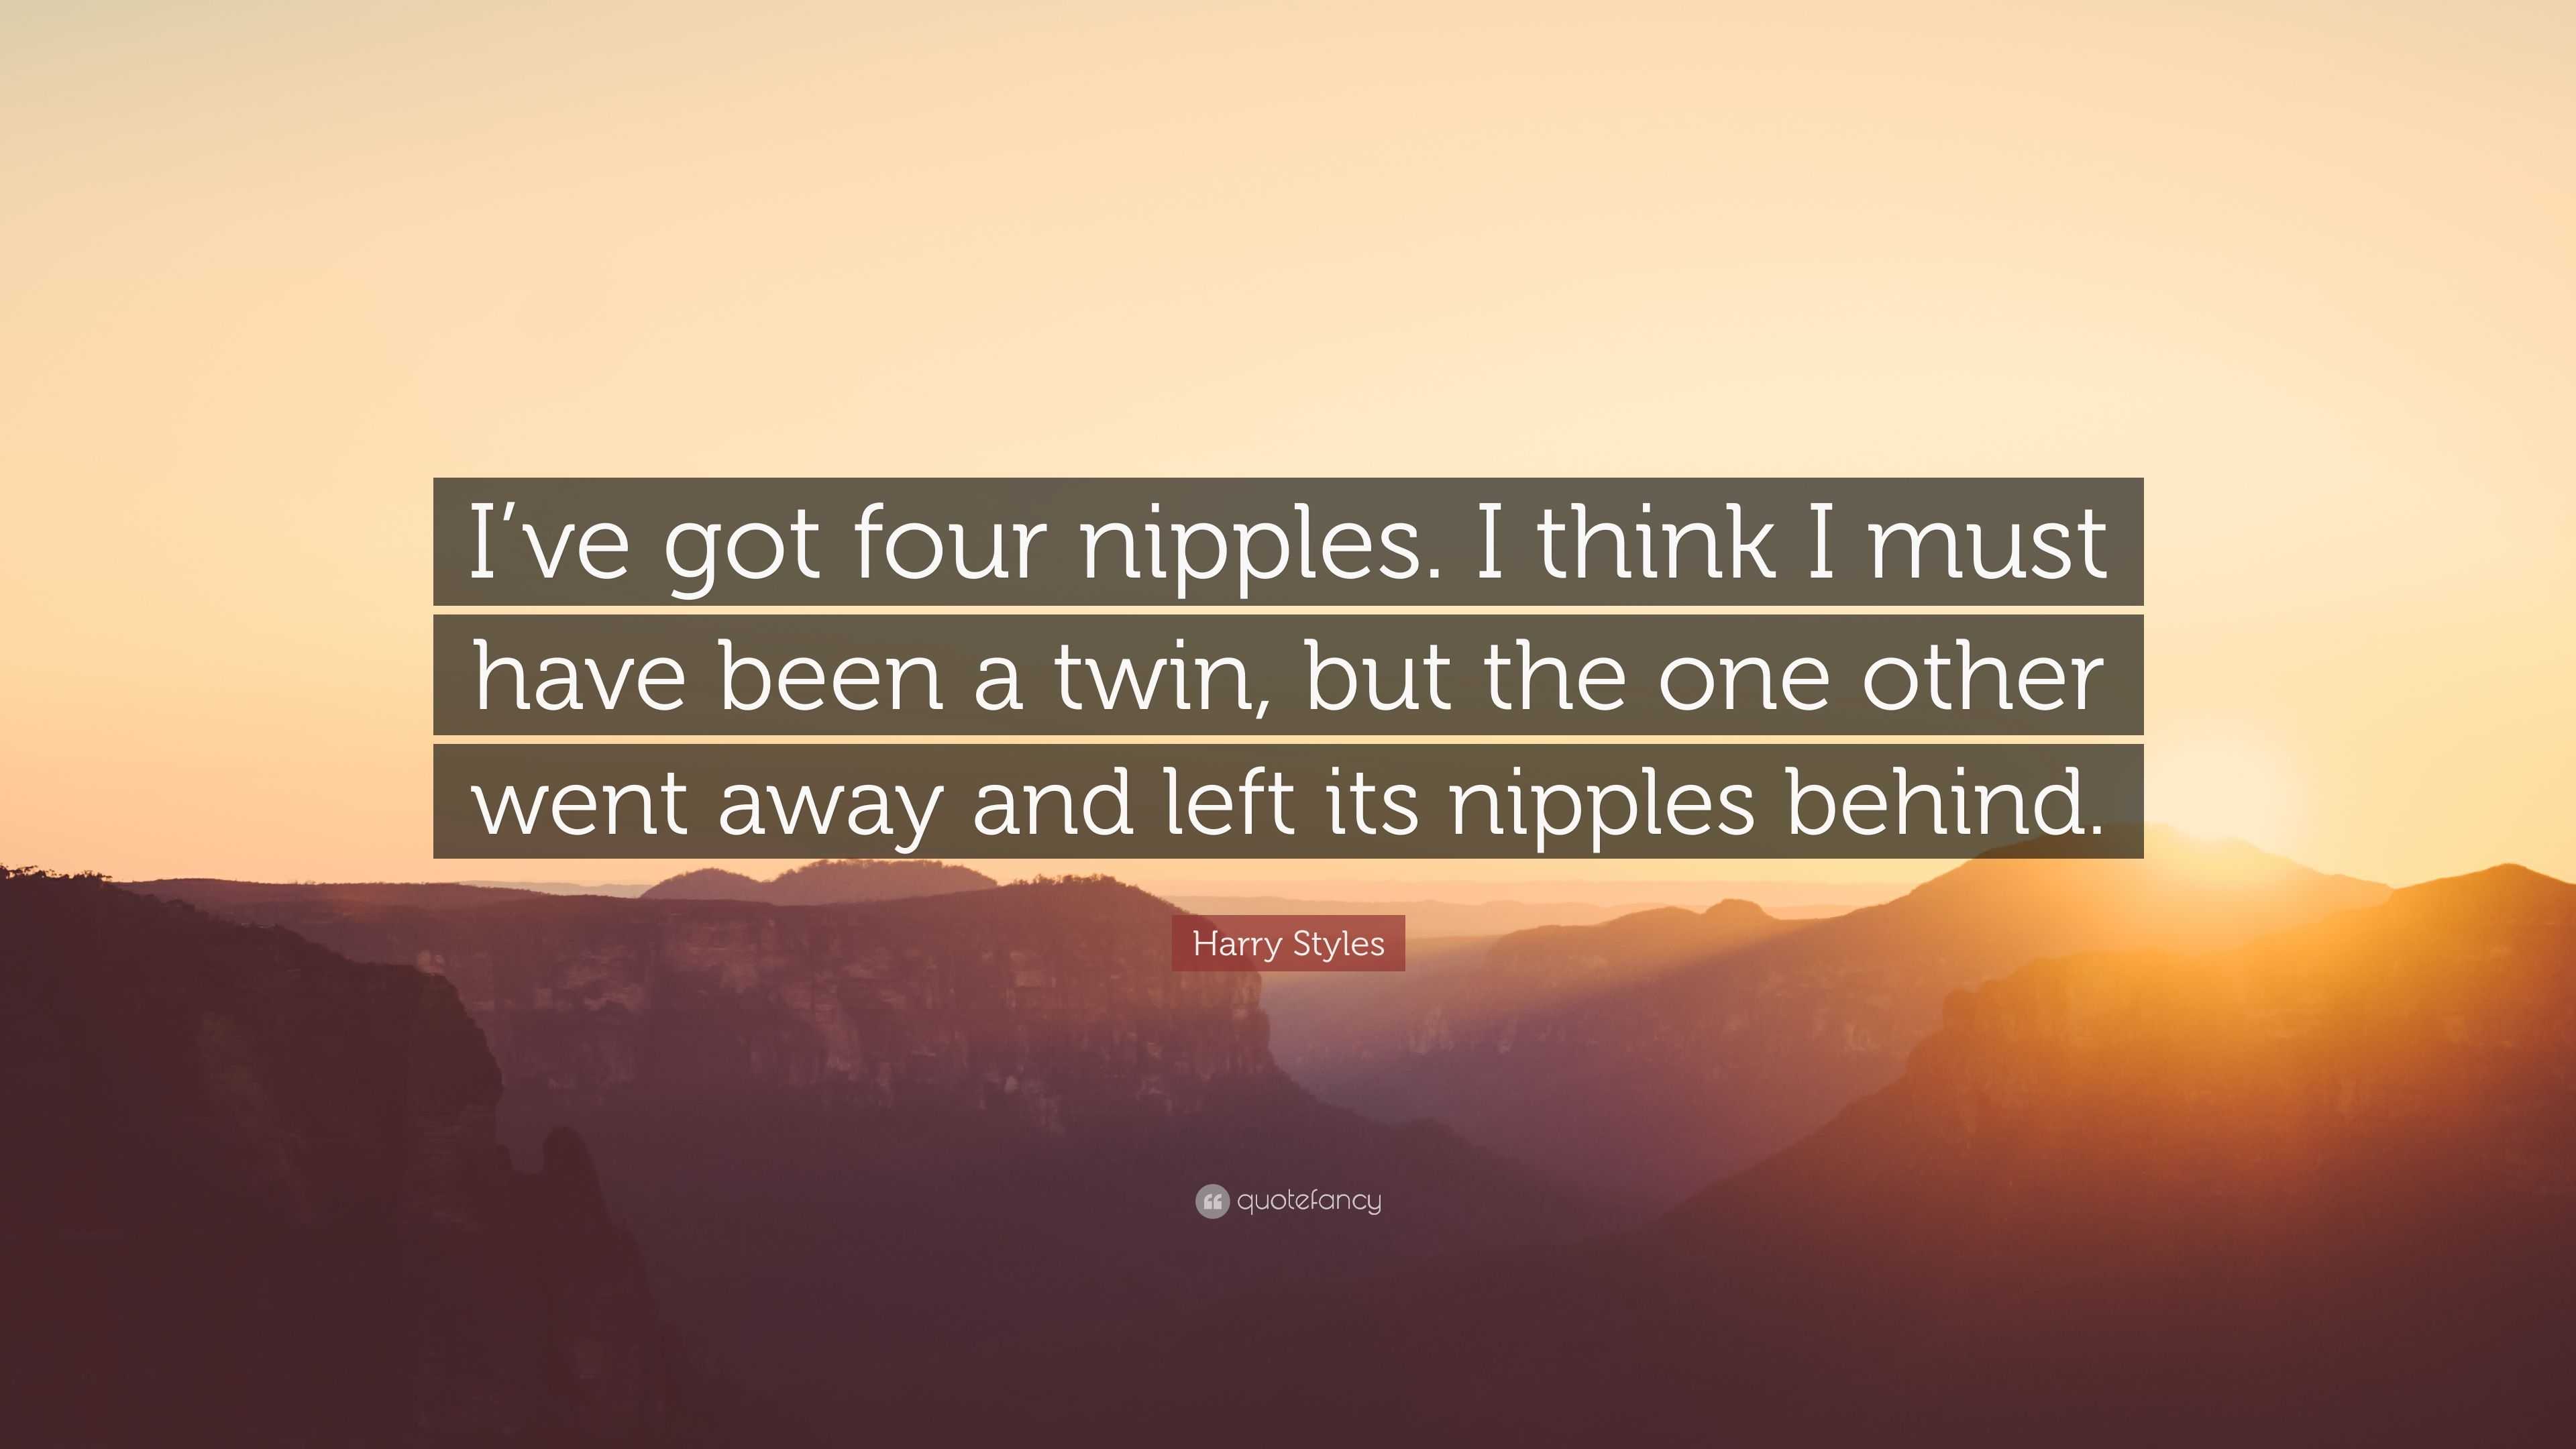 free the nipple quotes